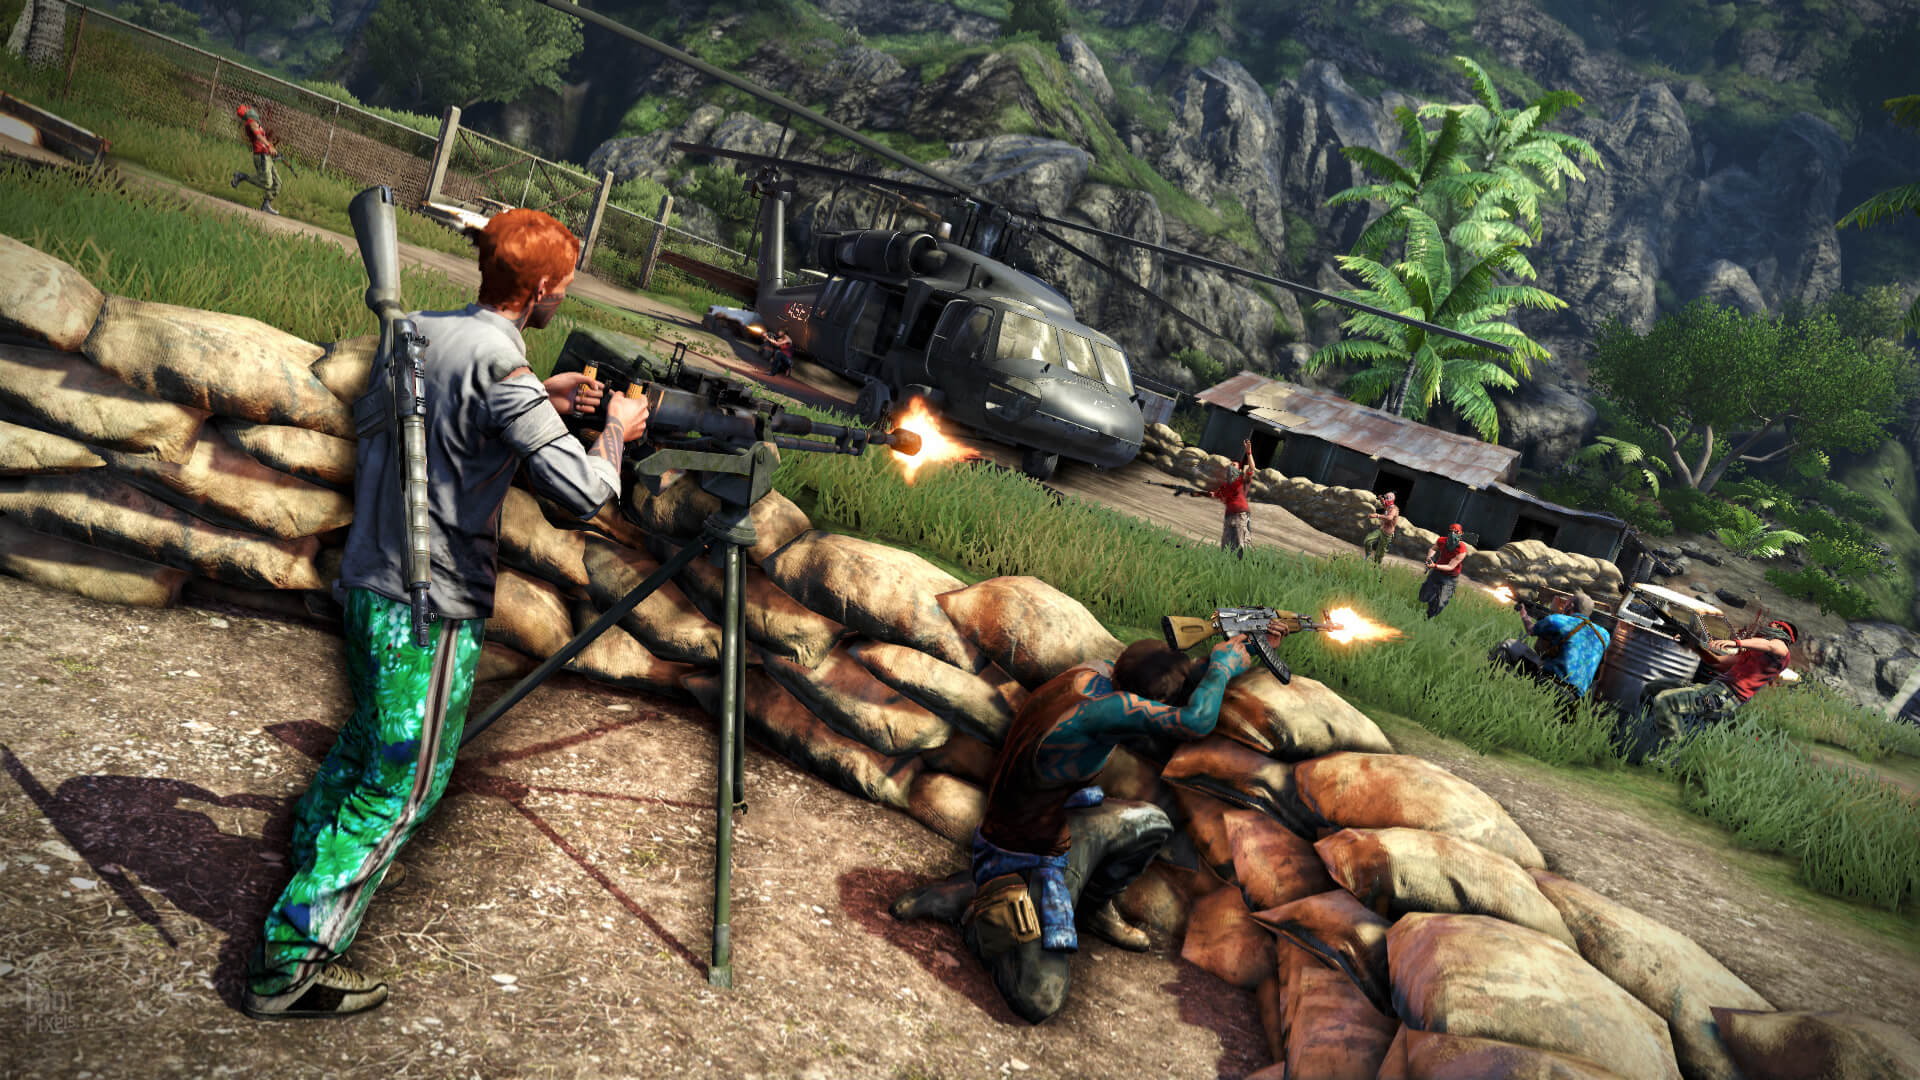 DOWNLOAD FAR CRY 3 HIGHLY COMPRESSED FOR PC IN 500 MB PARTS - TRAX GAMING CENTER